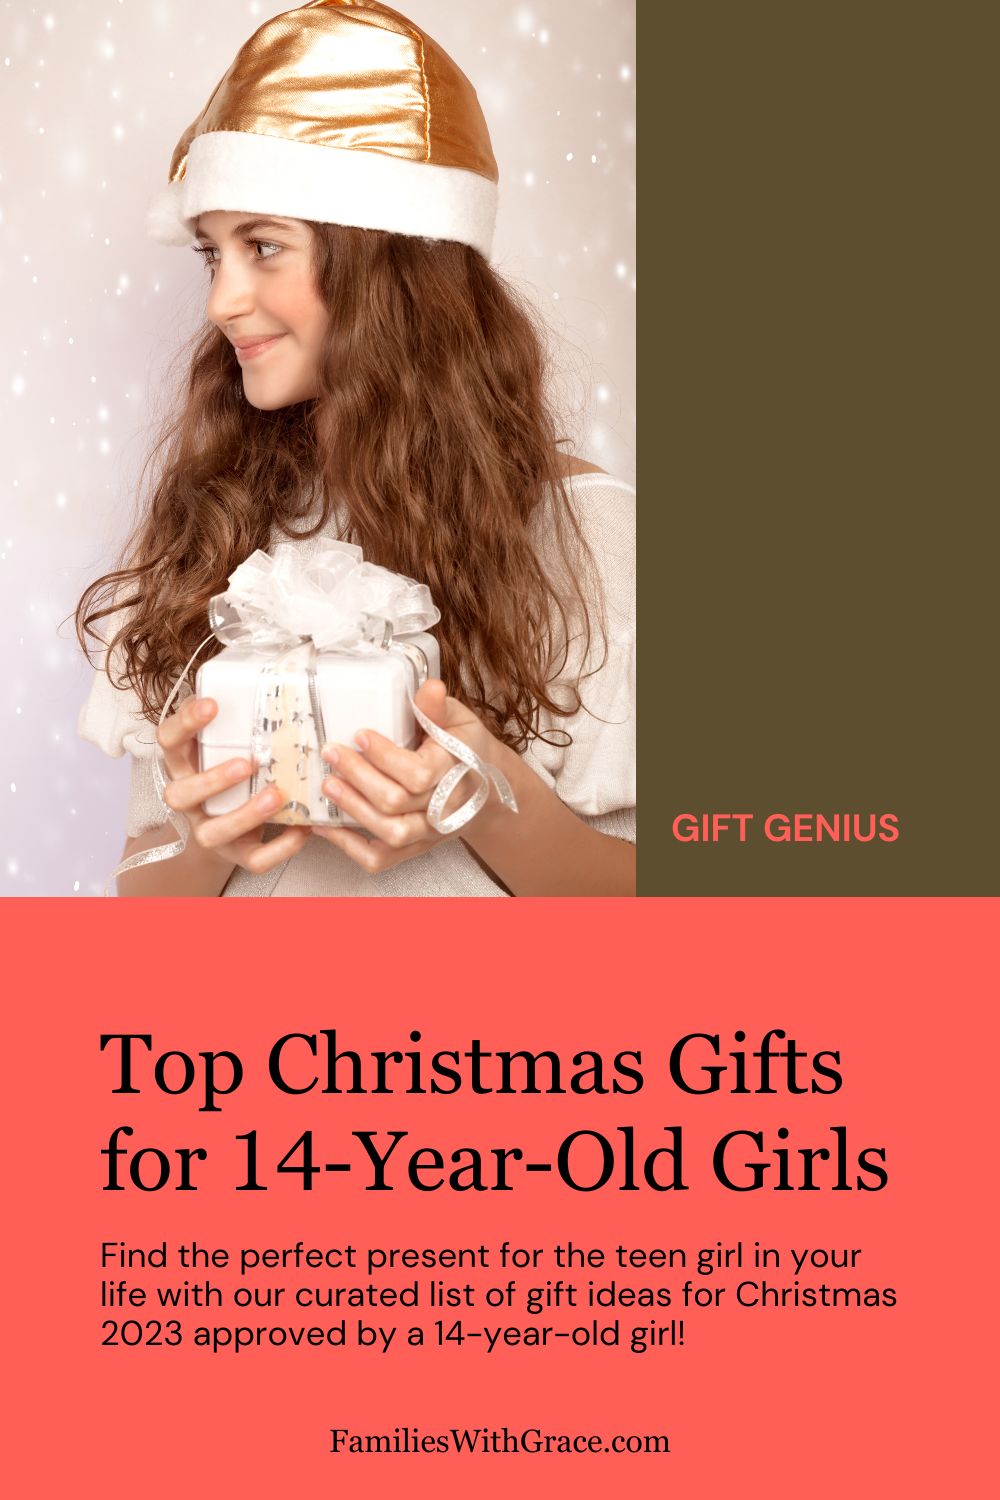 50 Best Gifts for 14-Year-Old Girls of 2023